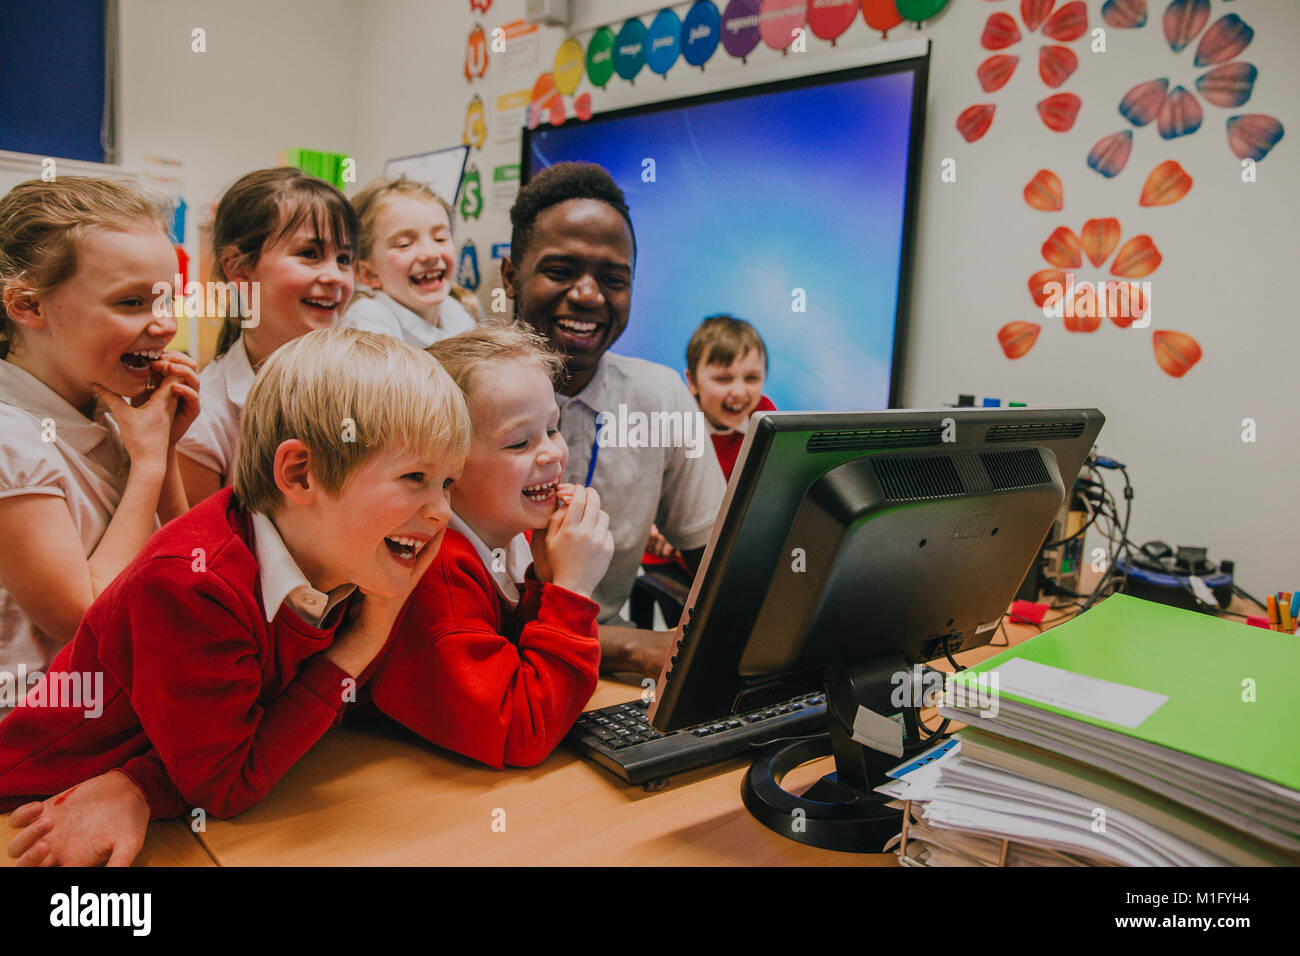 Group of primary school students are crowded round a computer with their teacher. They are all laughing and looking at the computer screen. Stock Photo